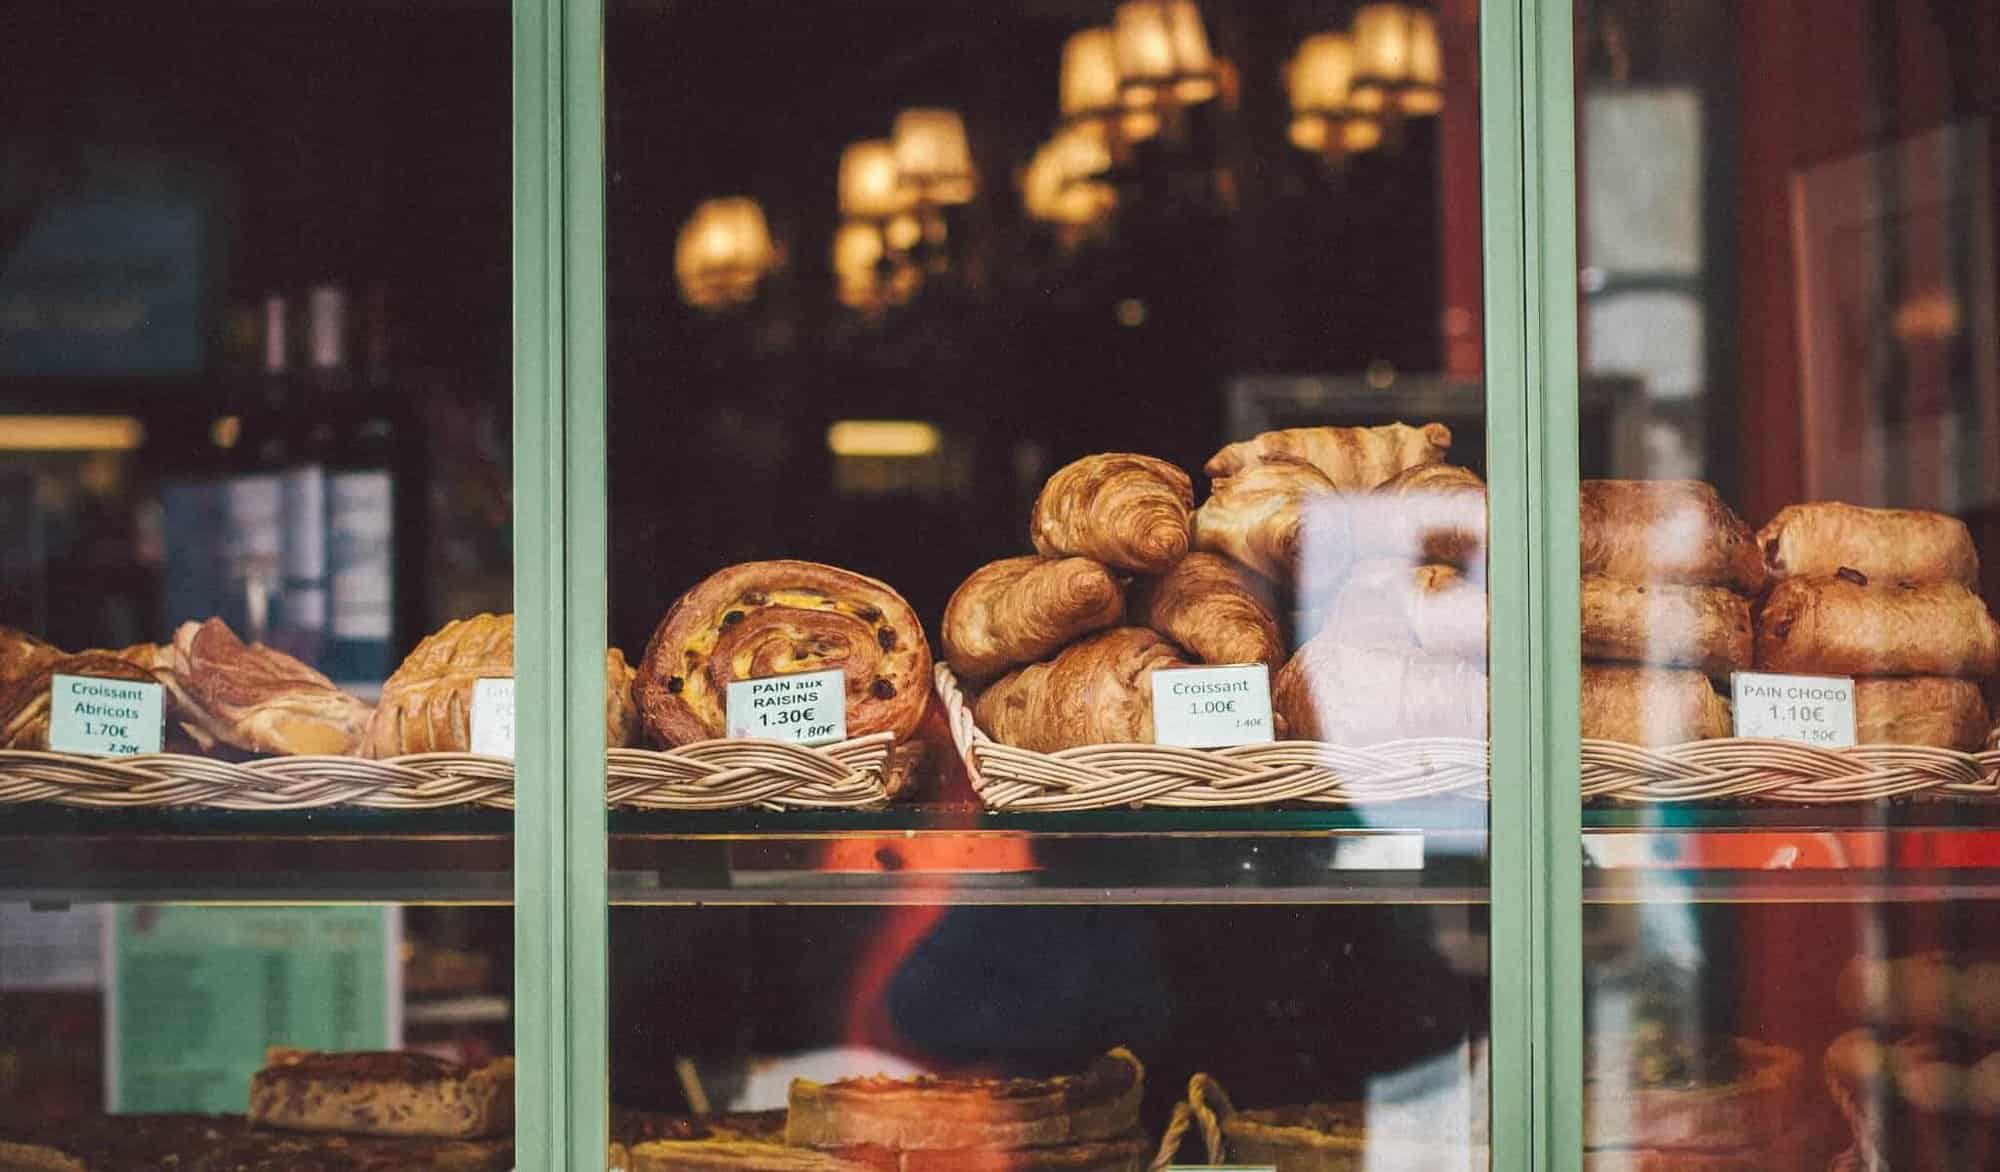 French bread and pastries are lined in a bakery window.